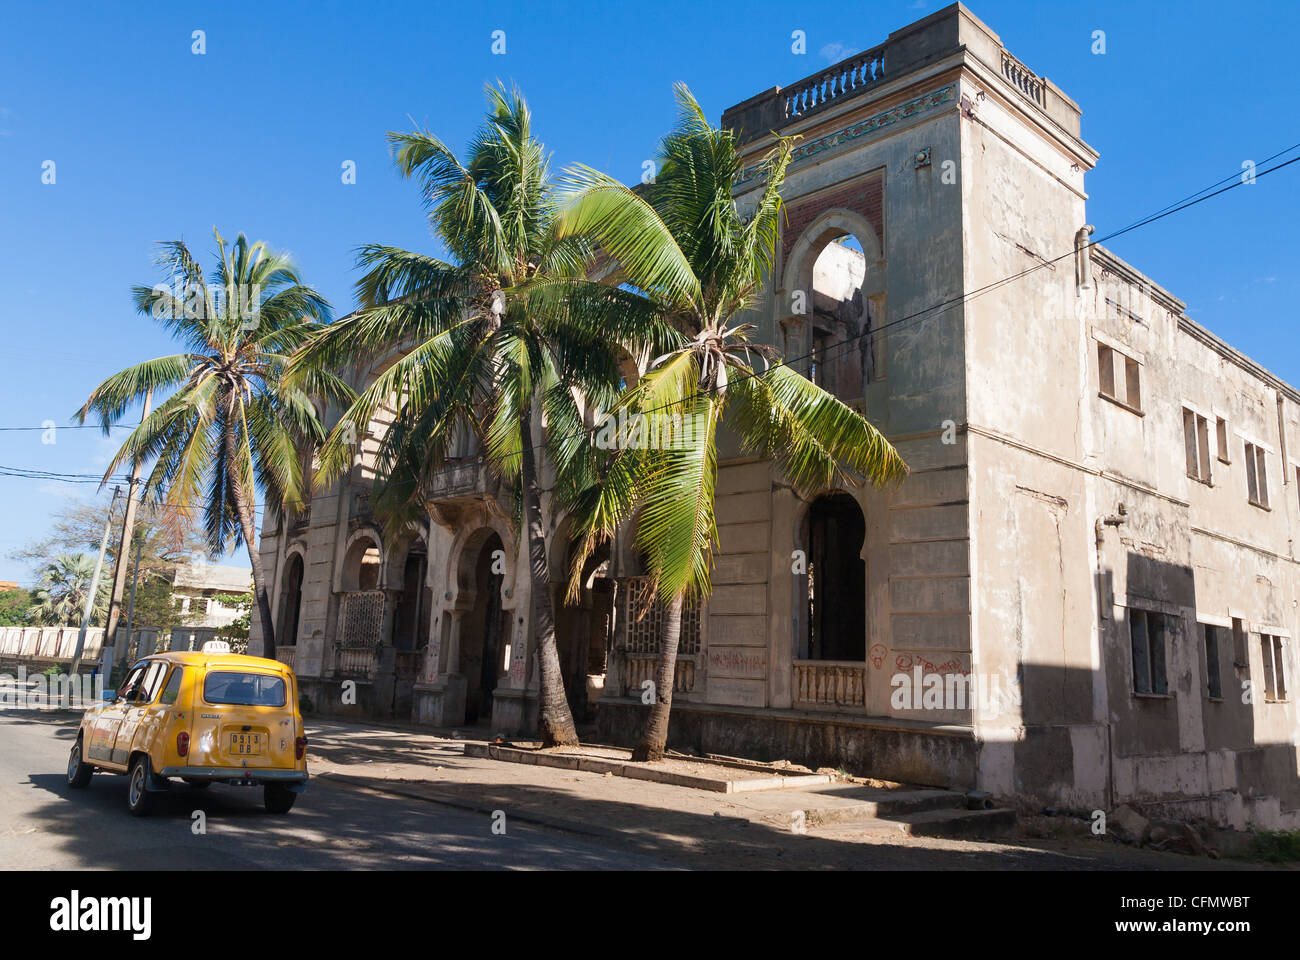 Diego Suarez city and his yellow Renault 4 taxis, northern Madagascar Stock Photo